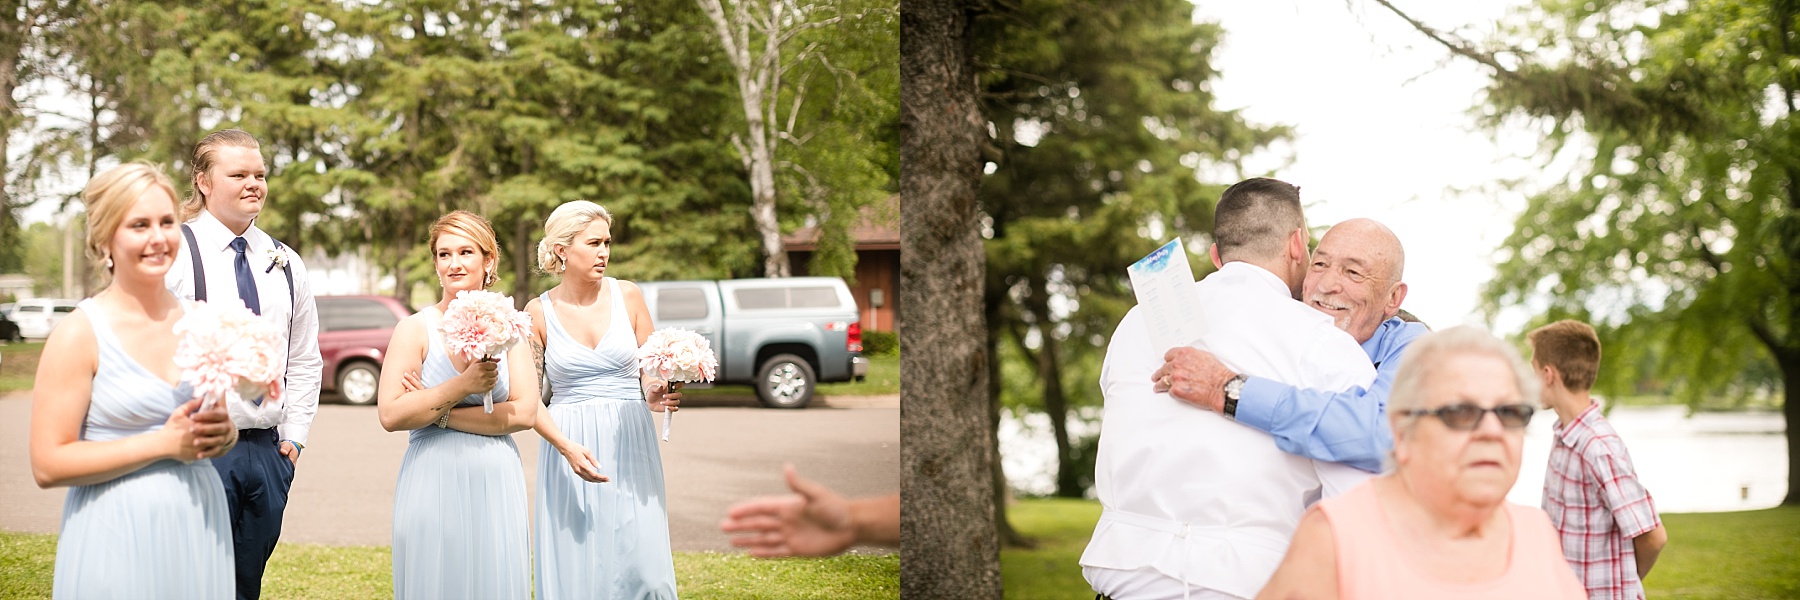 Boxing brought Darian & Wes together, but it was a simple and lovely walk down the aisle that sealed the deal for their wedding in Bloomer, WI.